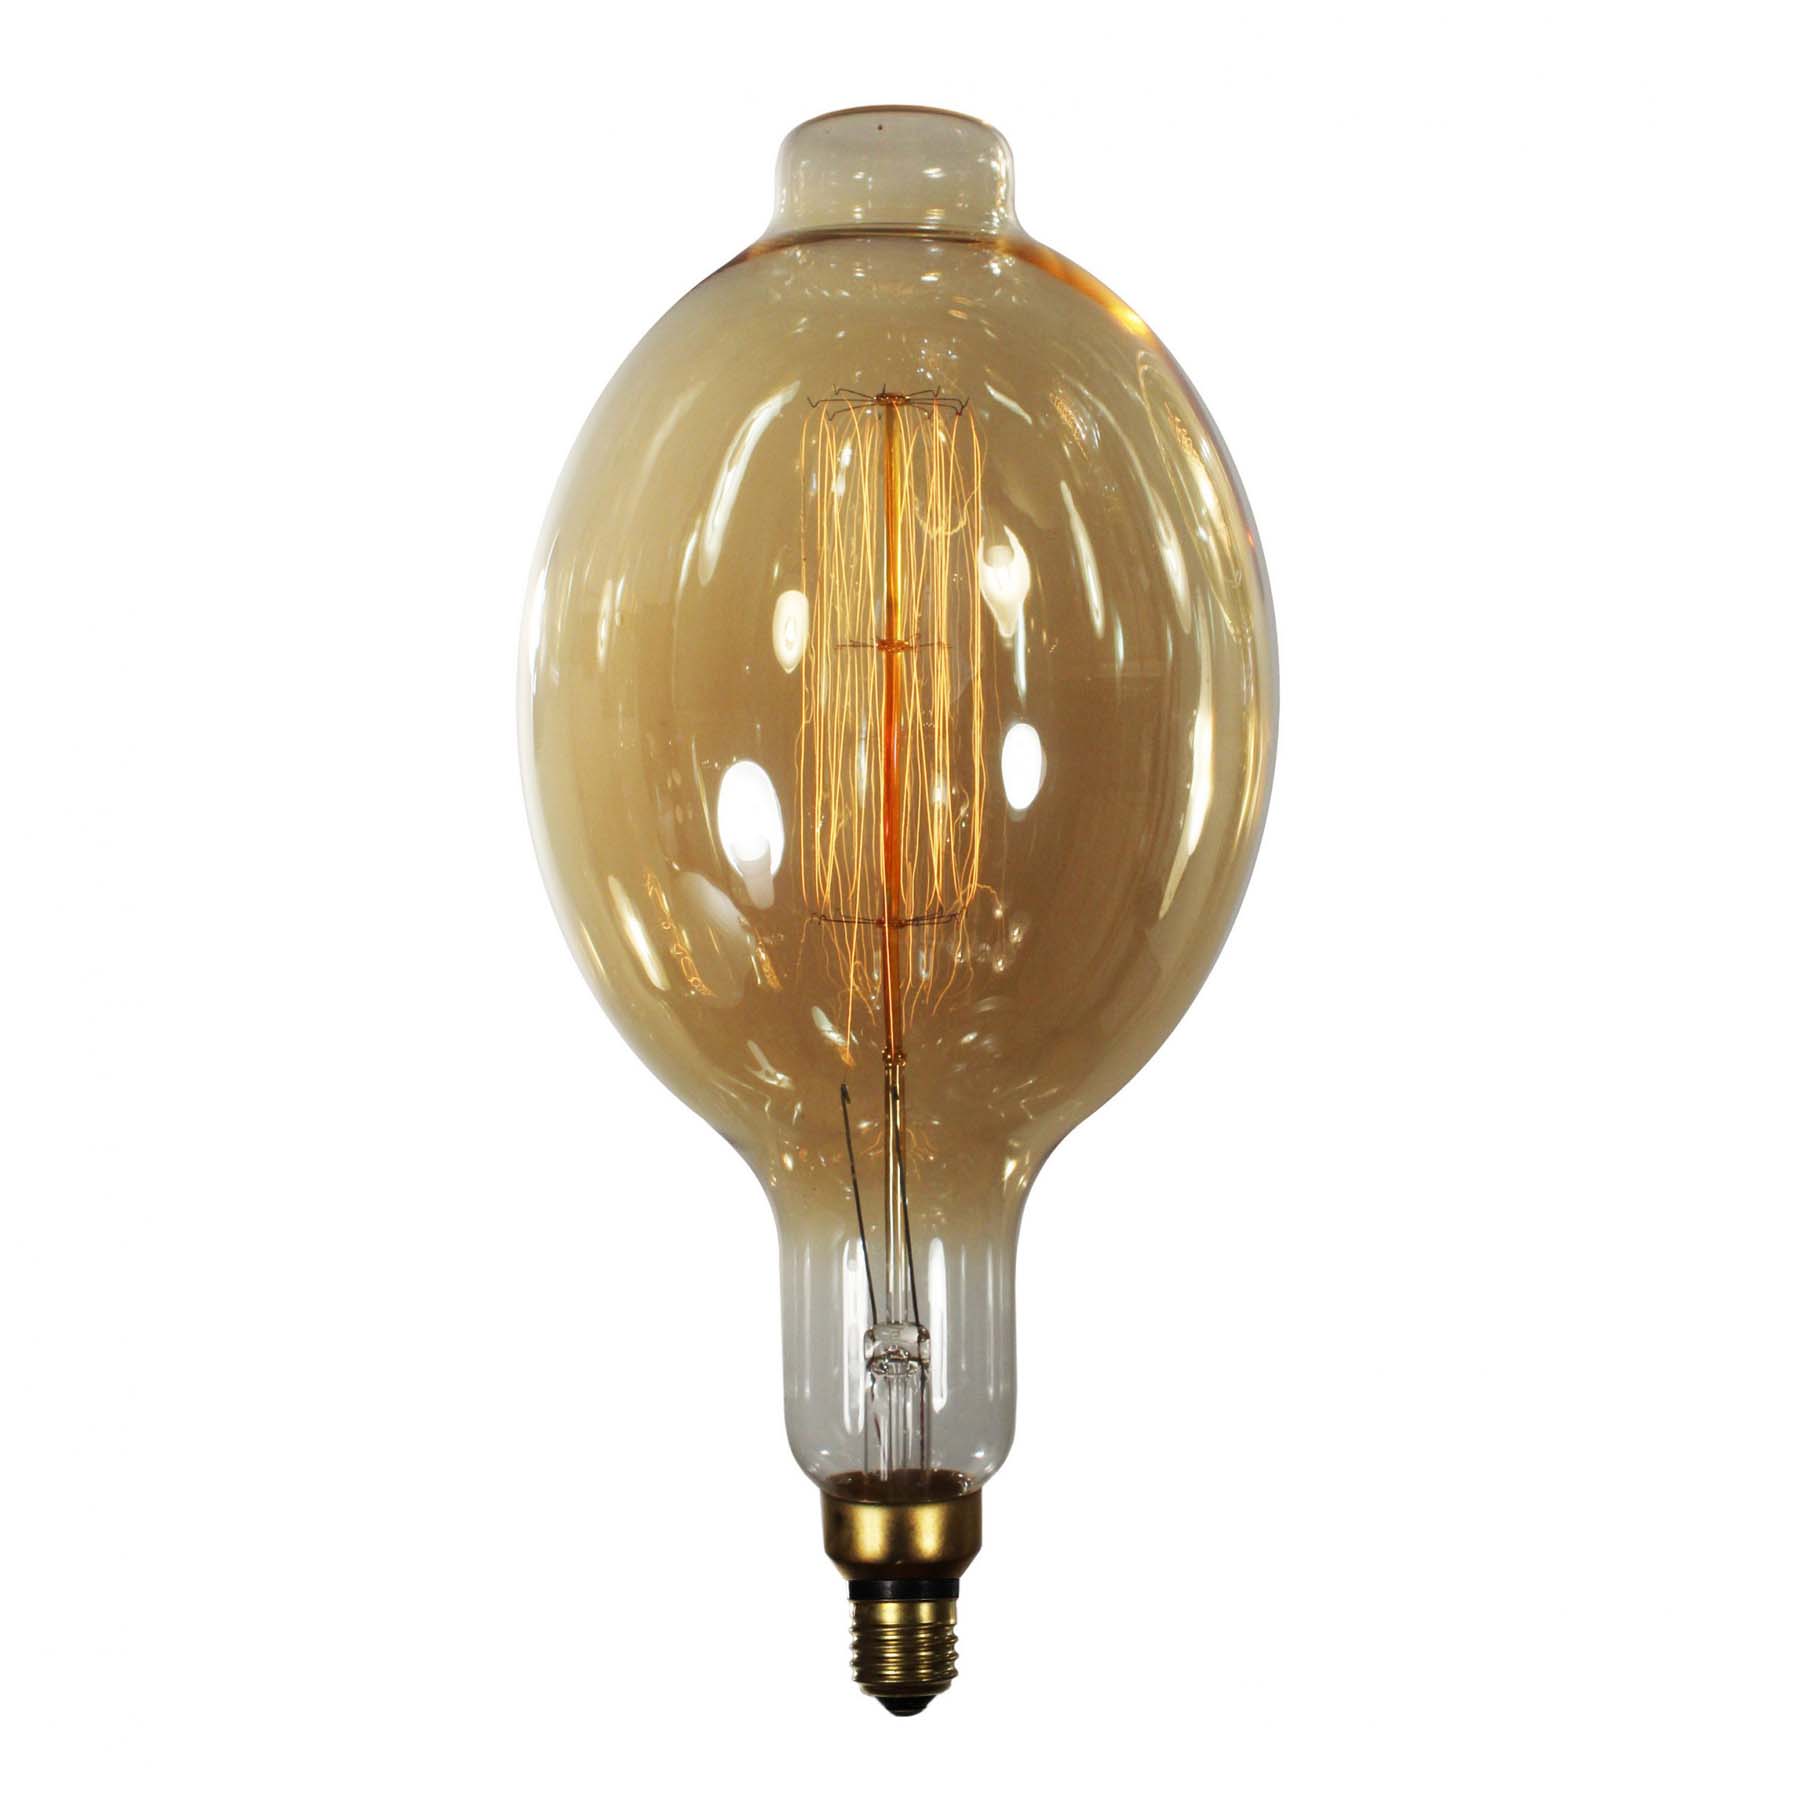 Reproduction Edison Bulb, Oval “Squirrel Cage”